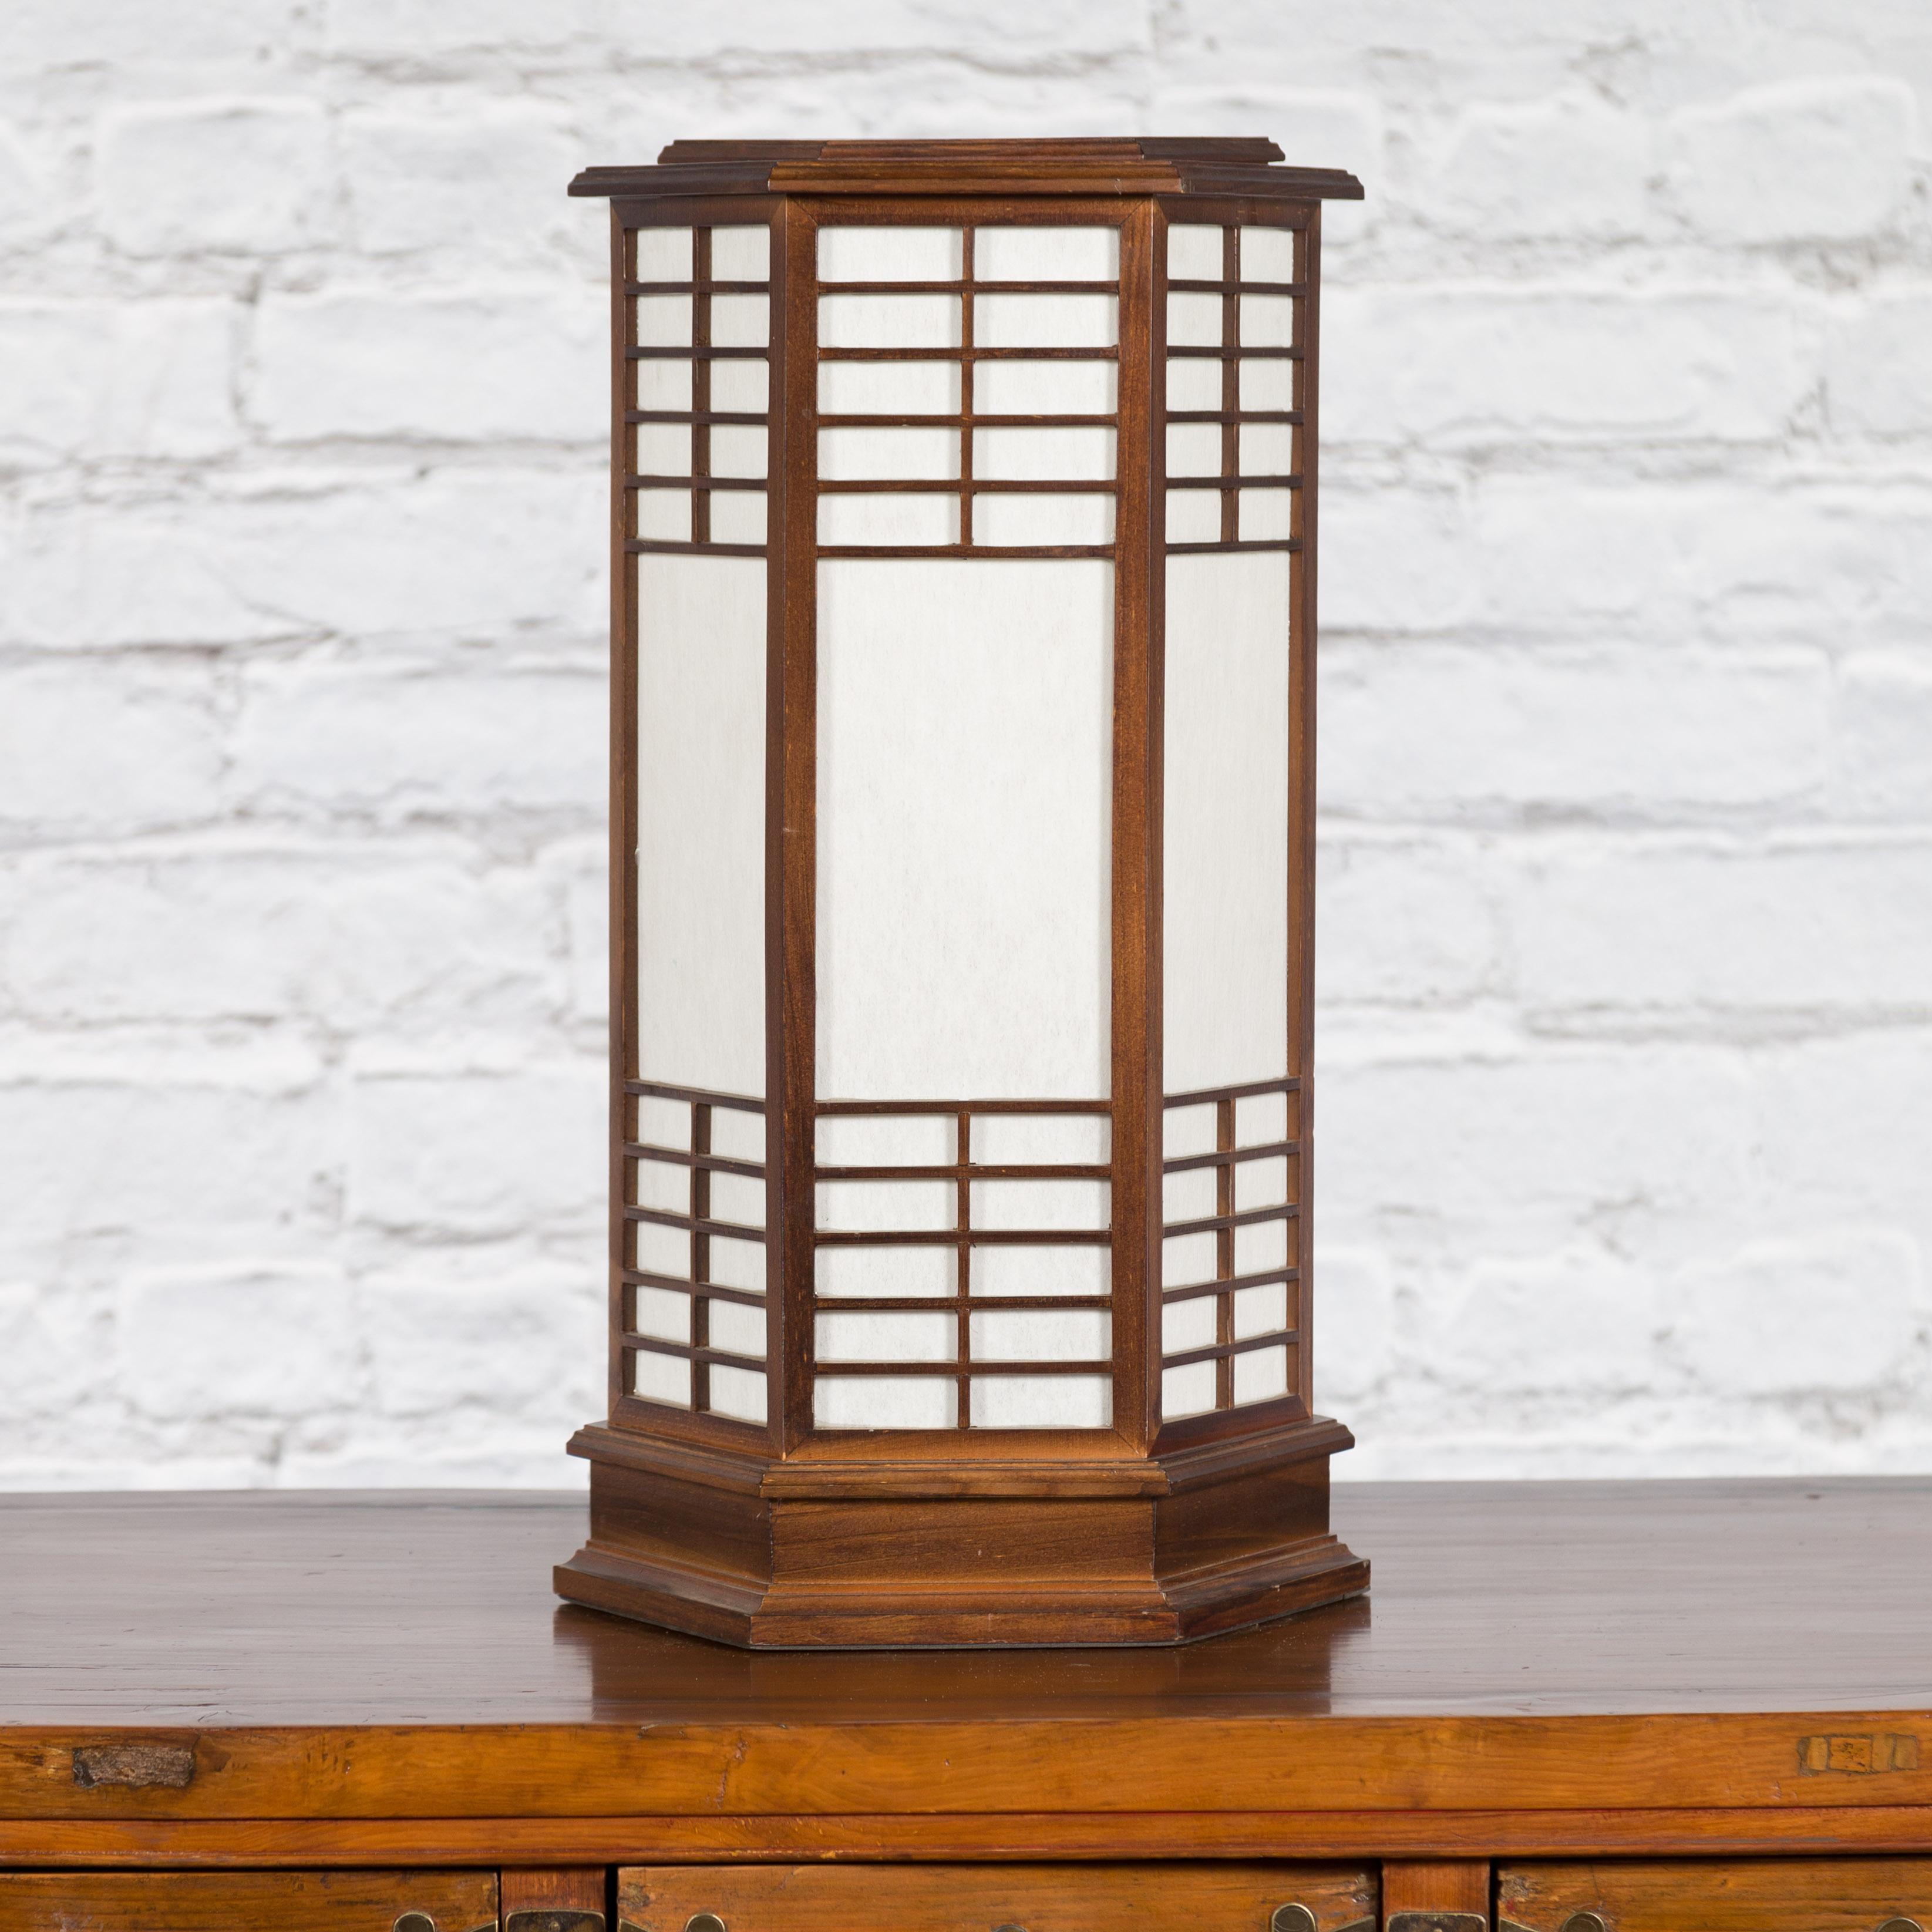 A vintage Japanese hexagonal wooden table lamp from the mid 20th century, with two lights and rice paper. Created in Japan during the midcentury period, this table lamp attracts the attention with its clean lines and complimenting colors. Showcasing